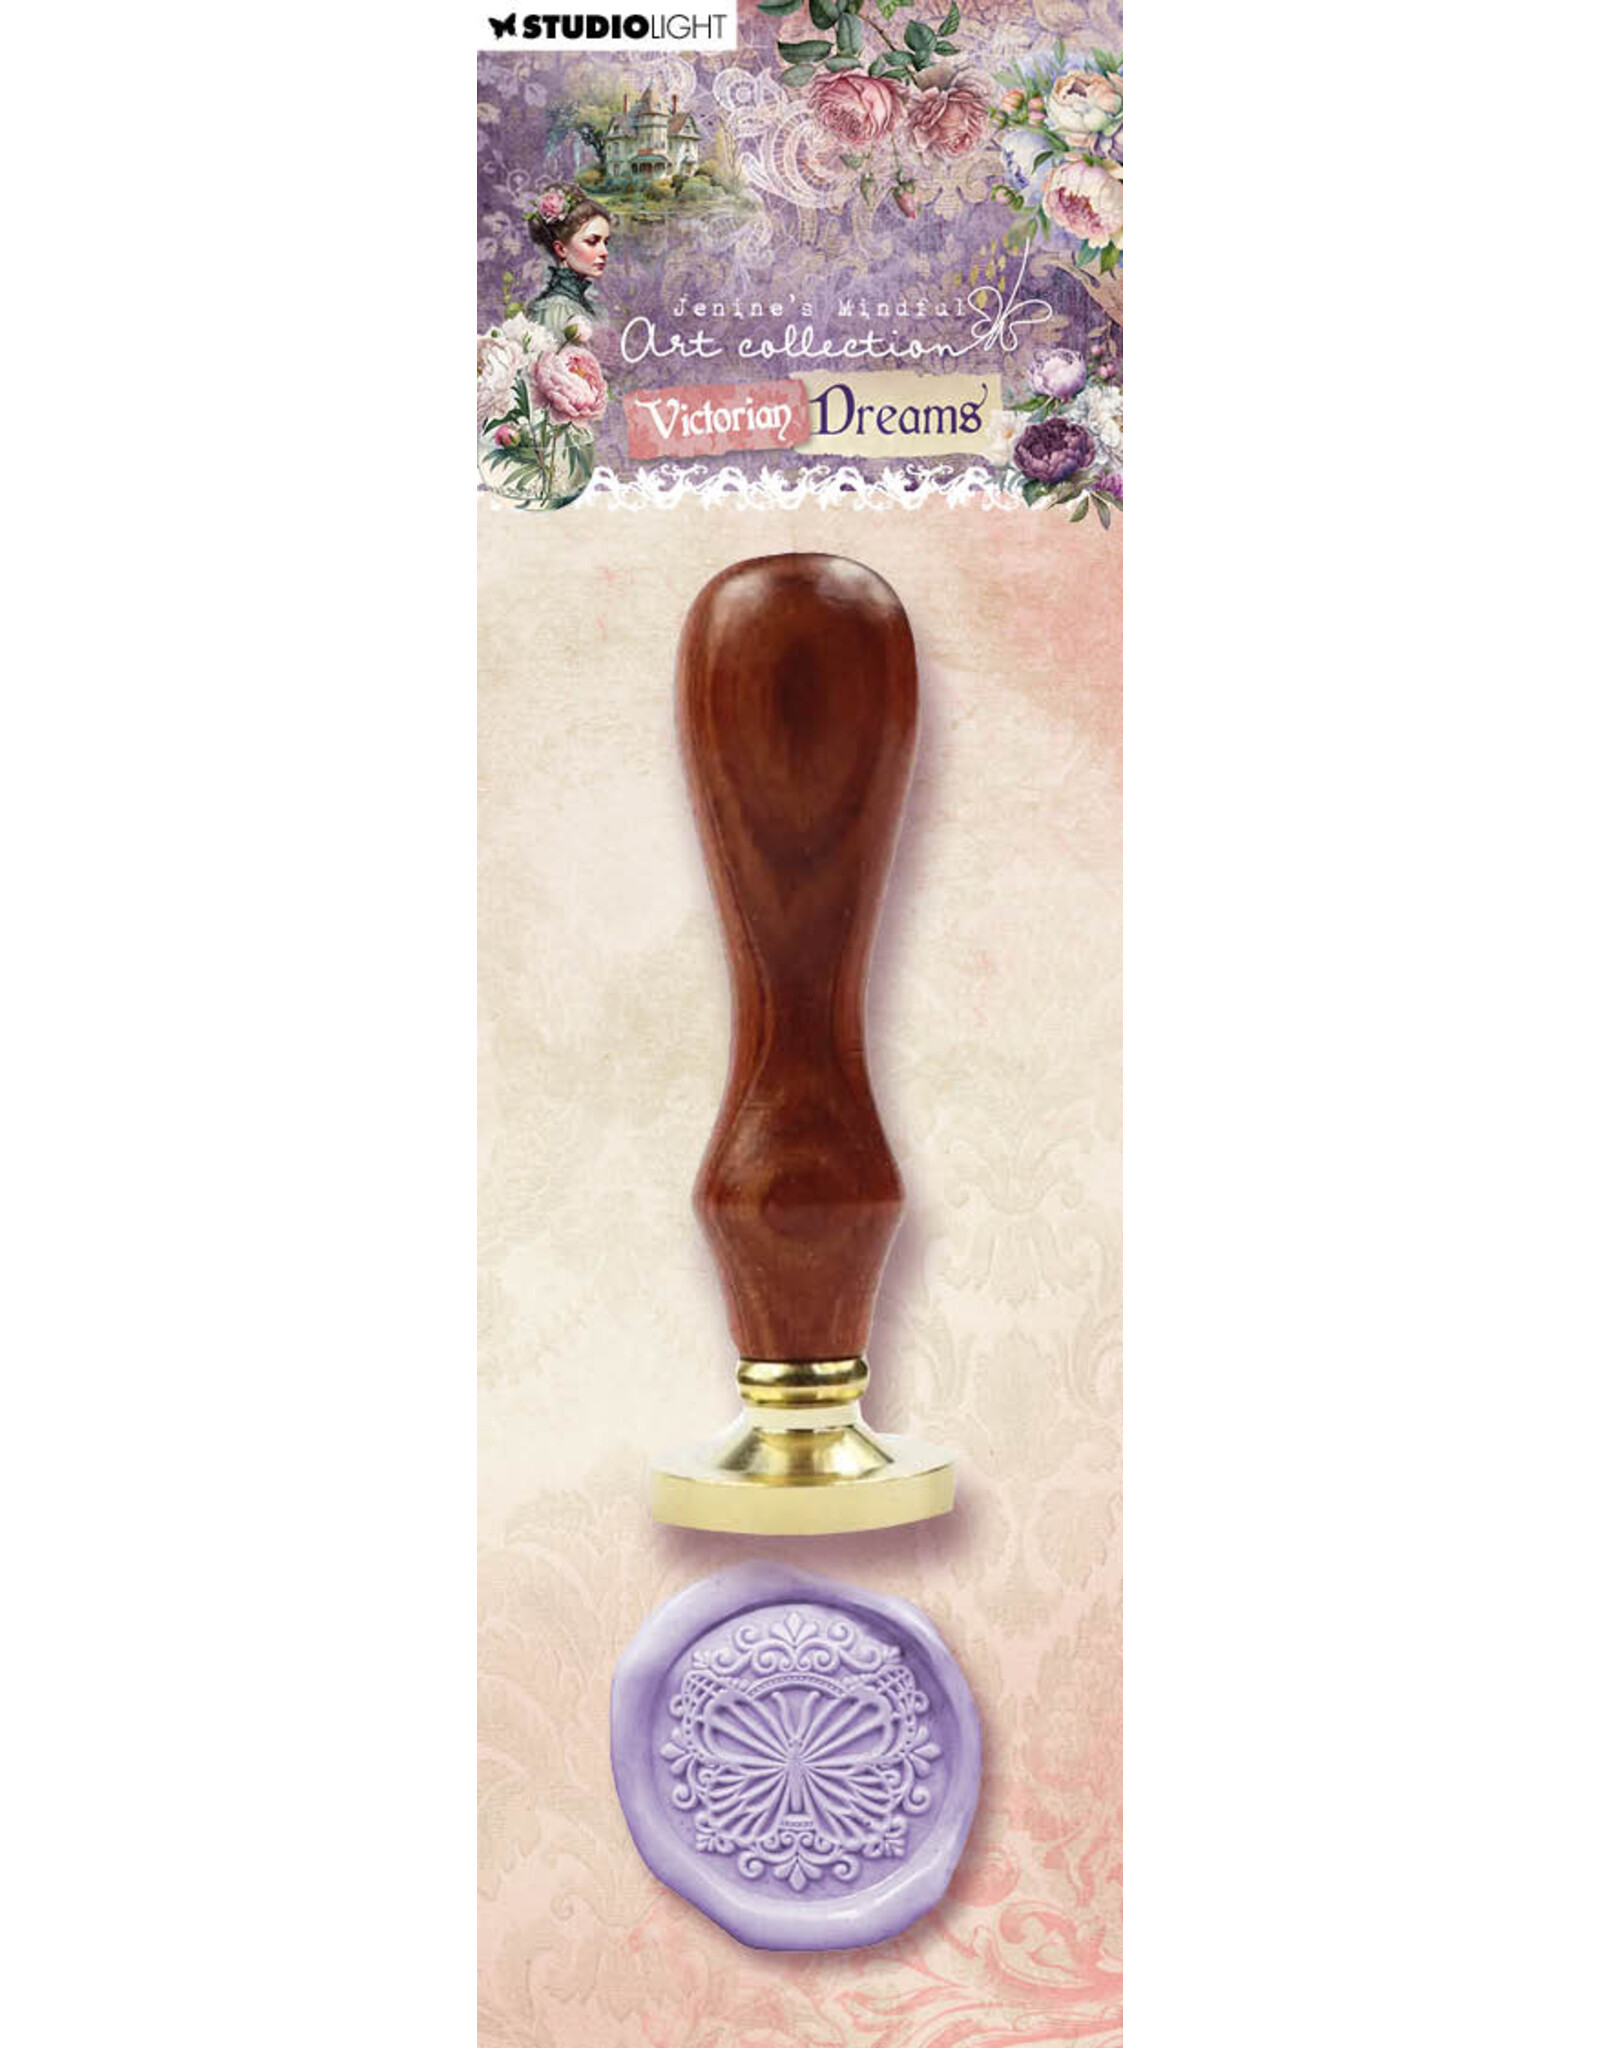 STUDIOLIGHT STUDIOLIGHT JENINE'S MINDFUL ART COLLECTION VICTORIAN DREAMS EMBELLISHED BUTTERFLY WAX STAMP WITH HANDLE